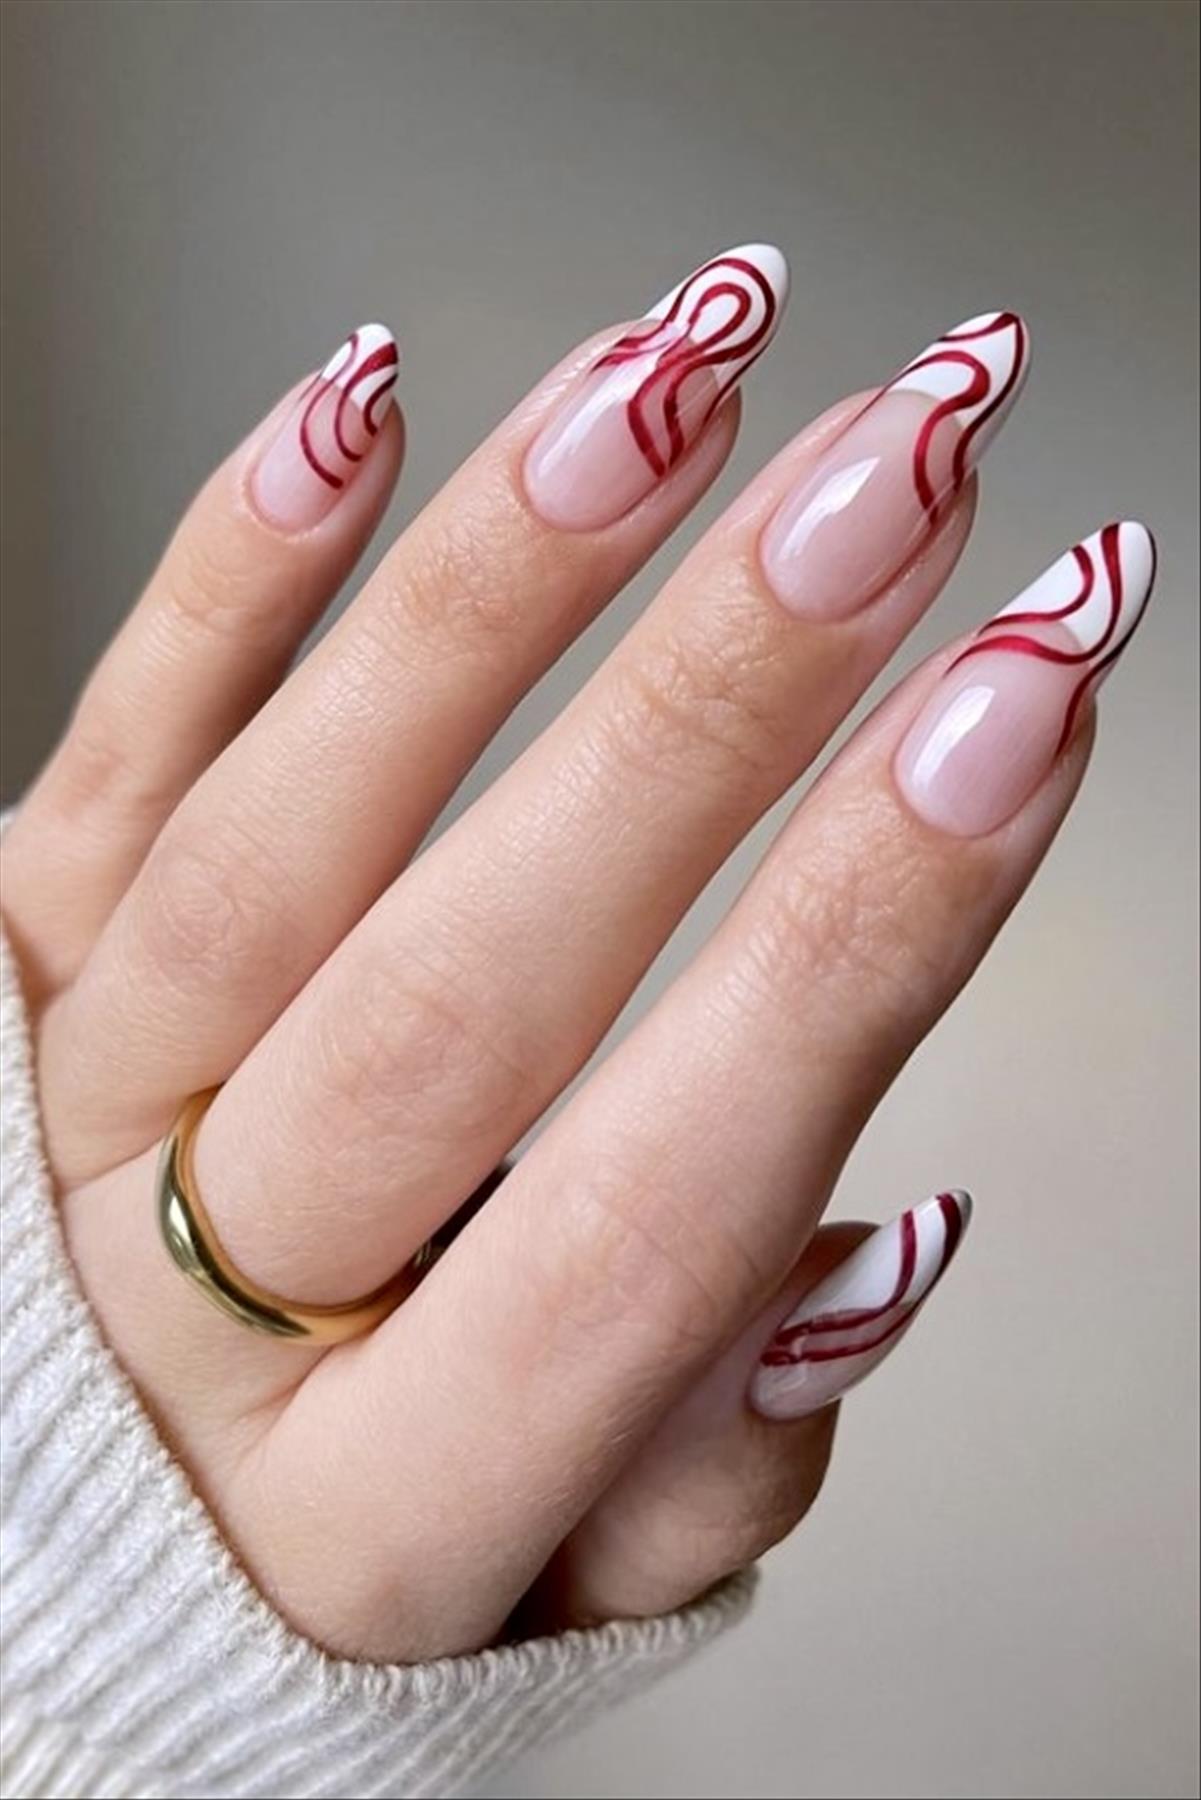 Best red nail design to be hot this Winter